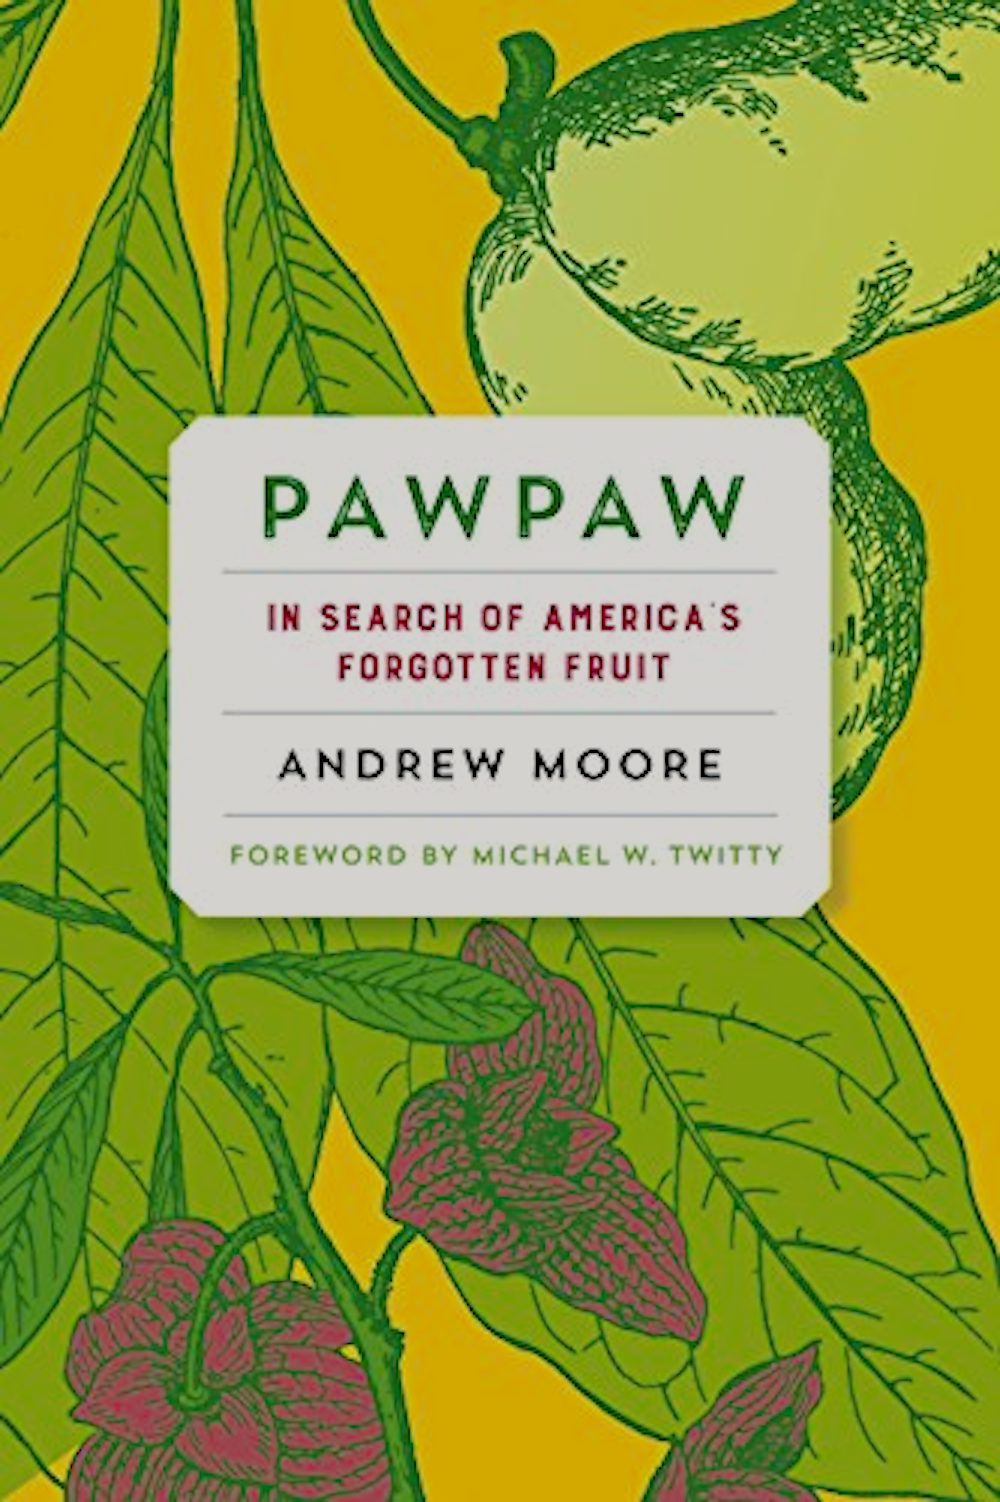 The cover of Pawpaw: In Search of America's Forgotten Fruit, with illustrated pawpaws on a yellow background.